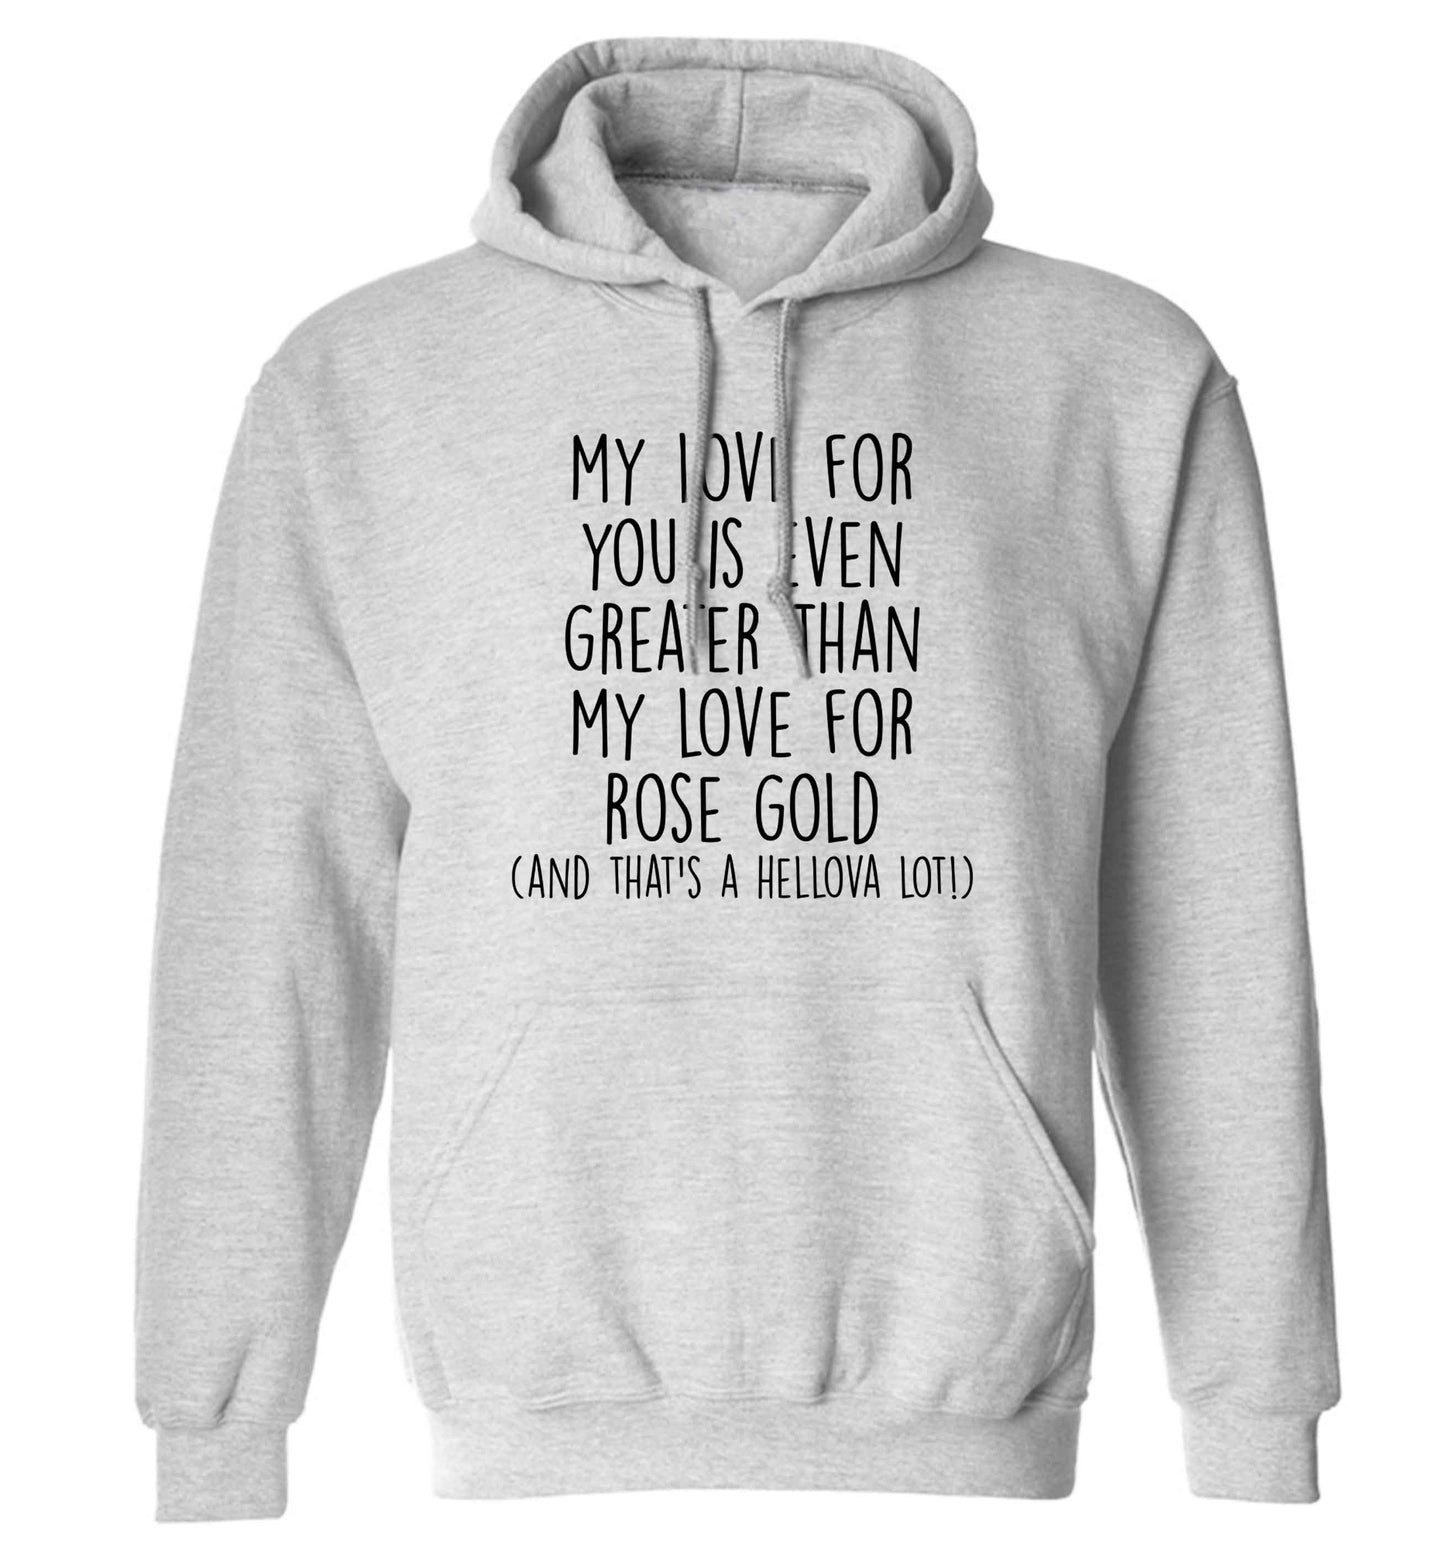 My love for you is even greater than my love for rose gold (and that's a hellova lot) adults unisex grey hoodie 2XL